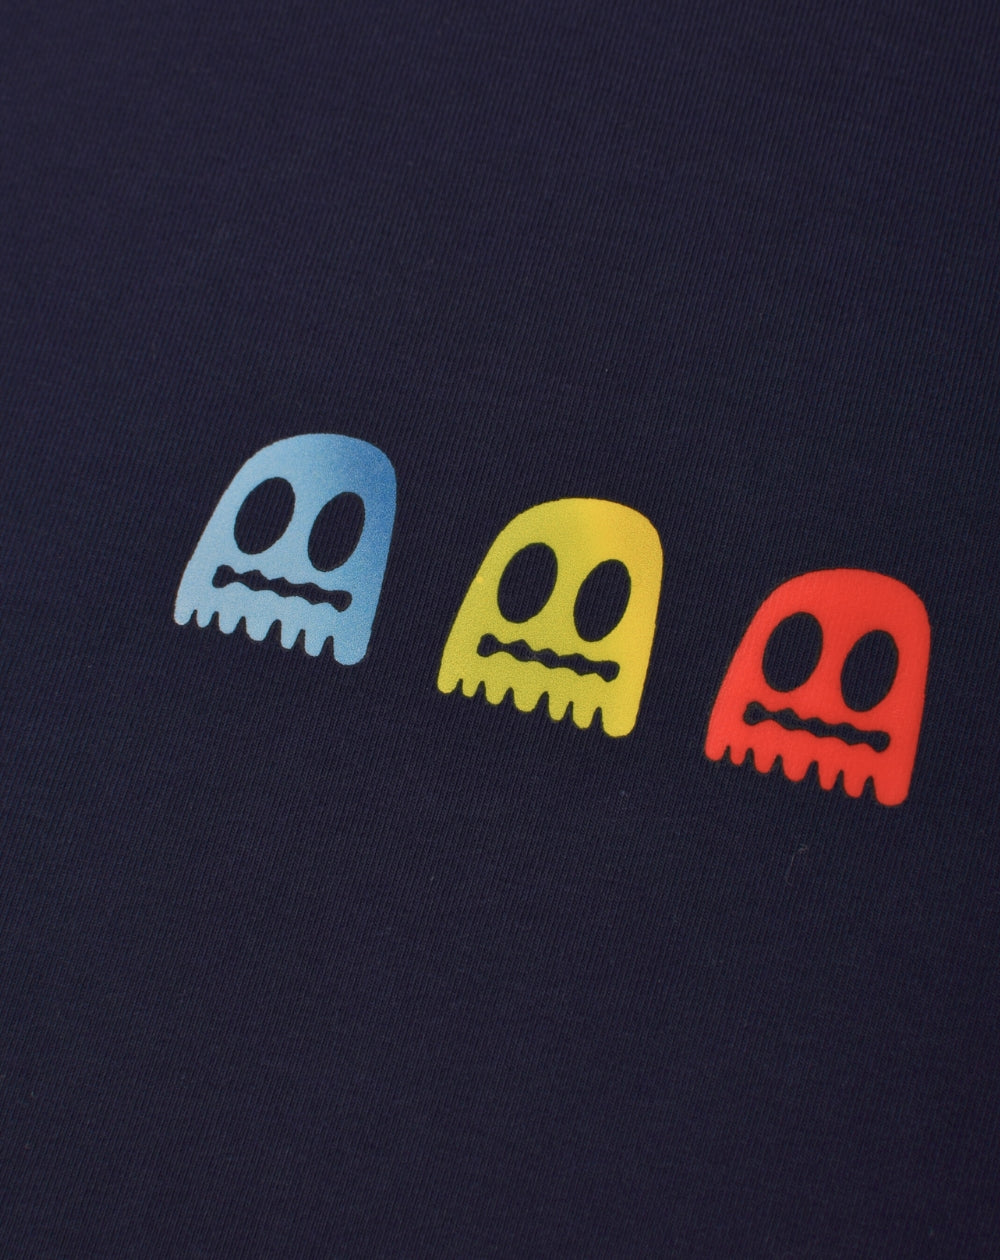 Ghosts Are Real | Unisex Adult Navy